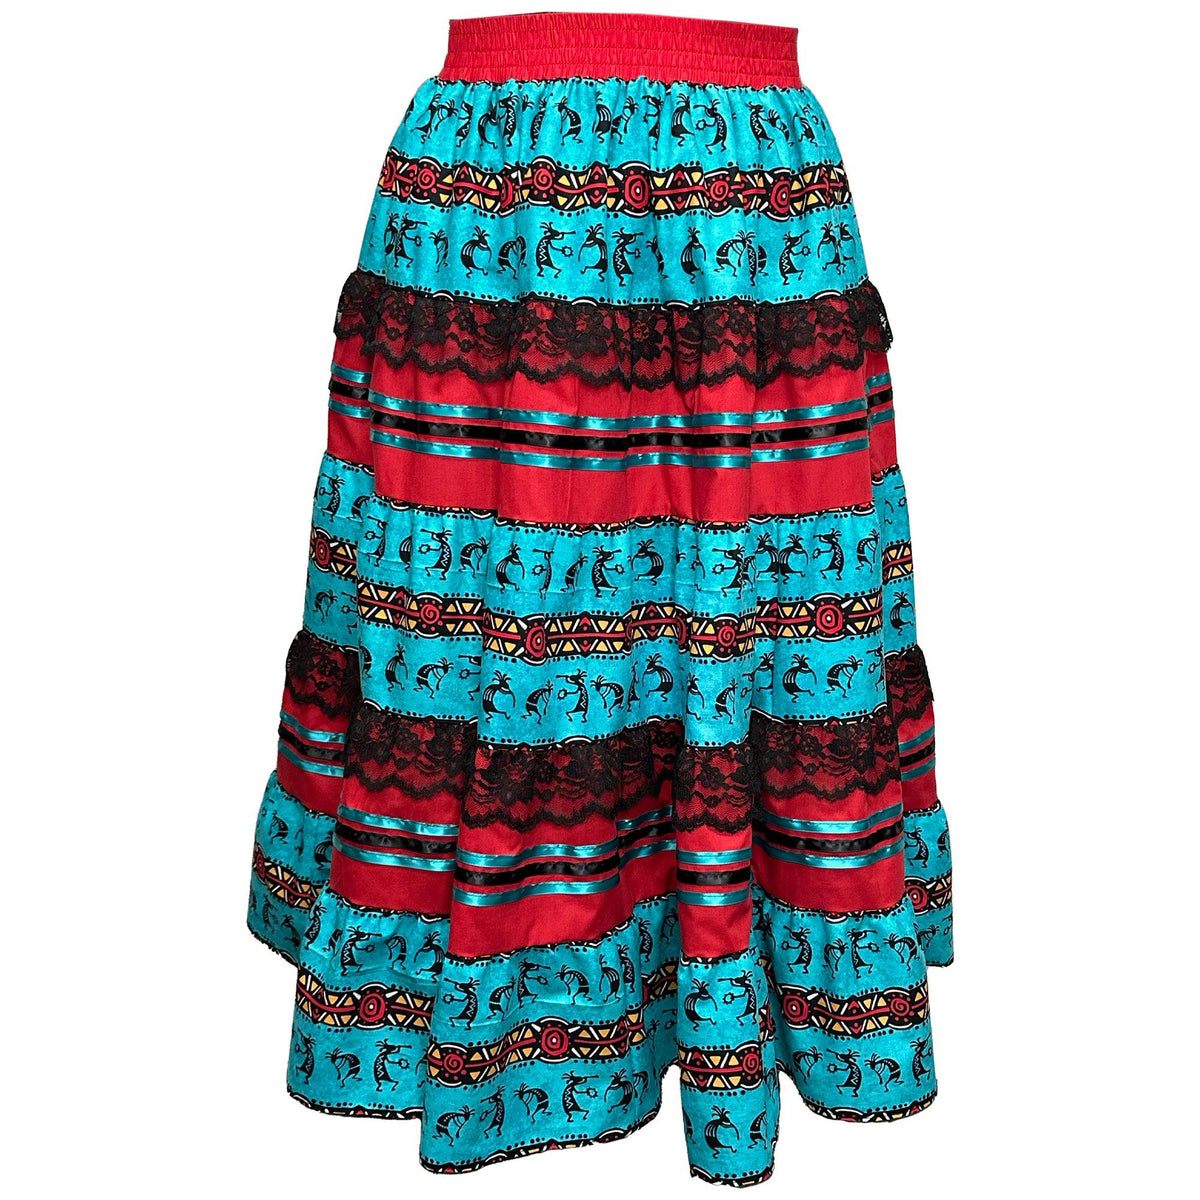 A Kokopelli Prairie Skirt from Square Up Fashions with a red, blue and black pattern.